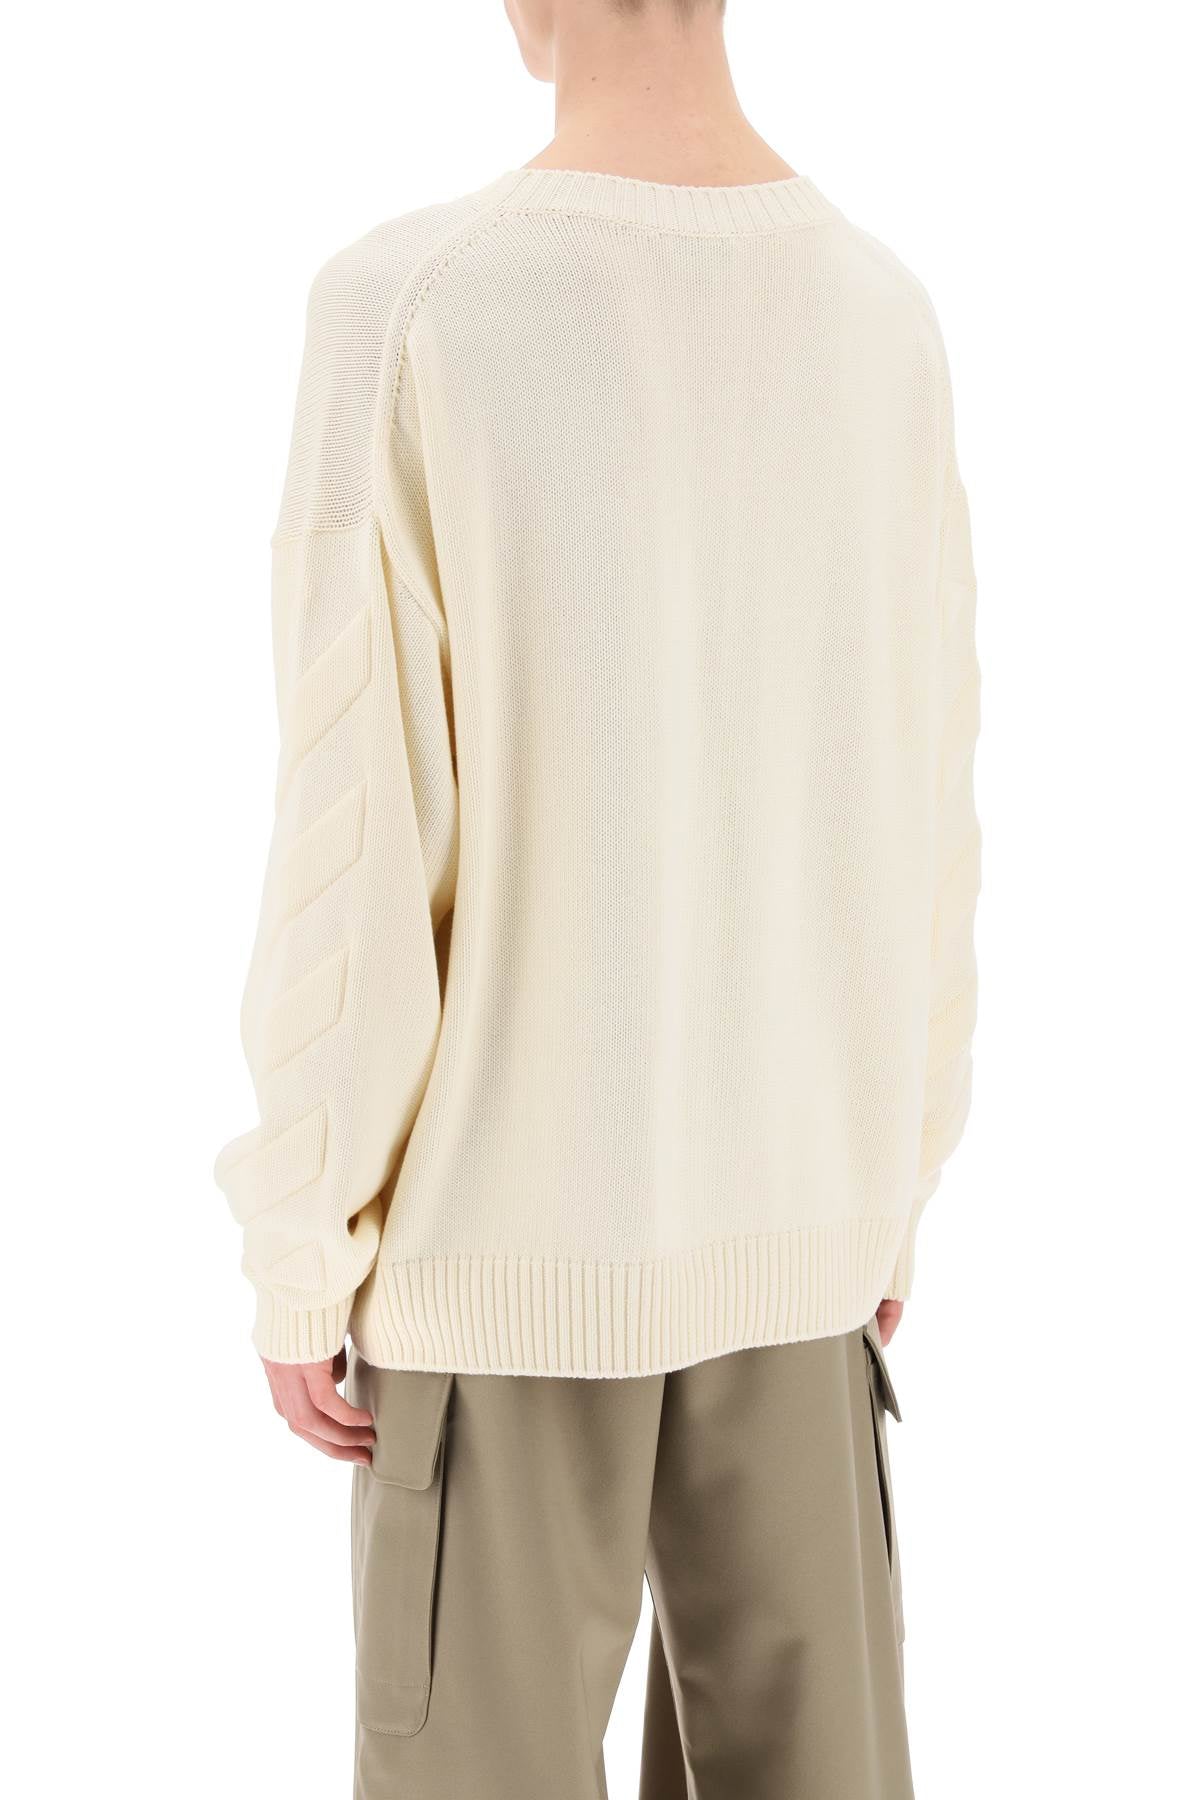 OFF-WHITE Men's Grey Sweater with Embossed Diagonal Motif